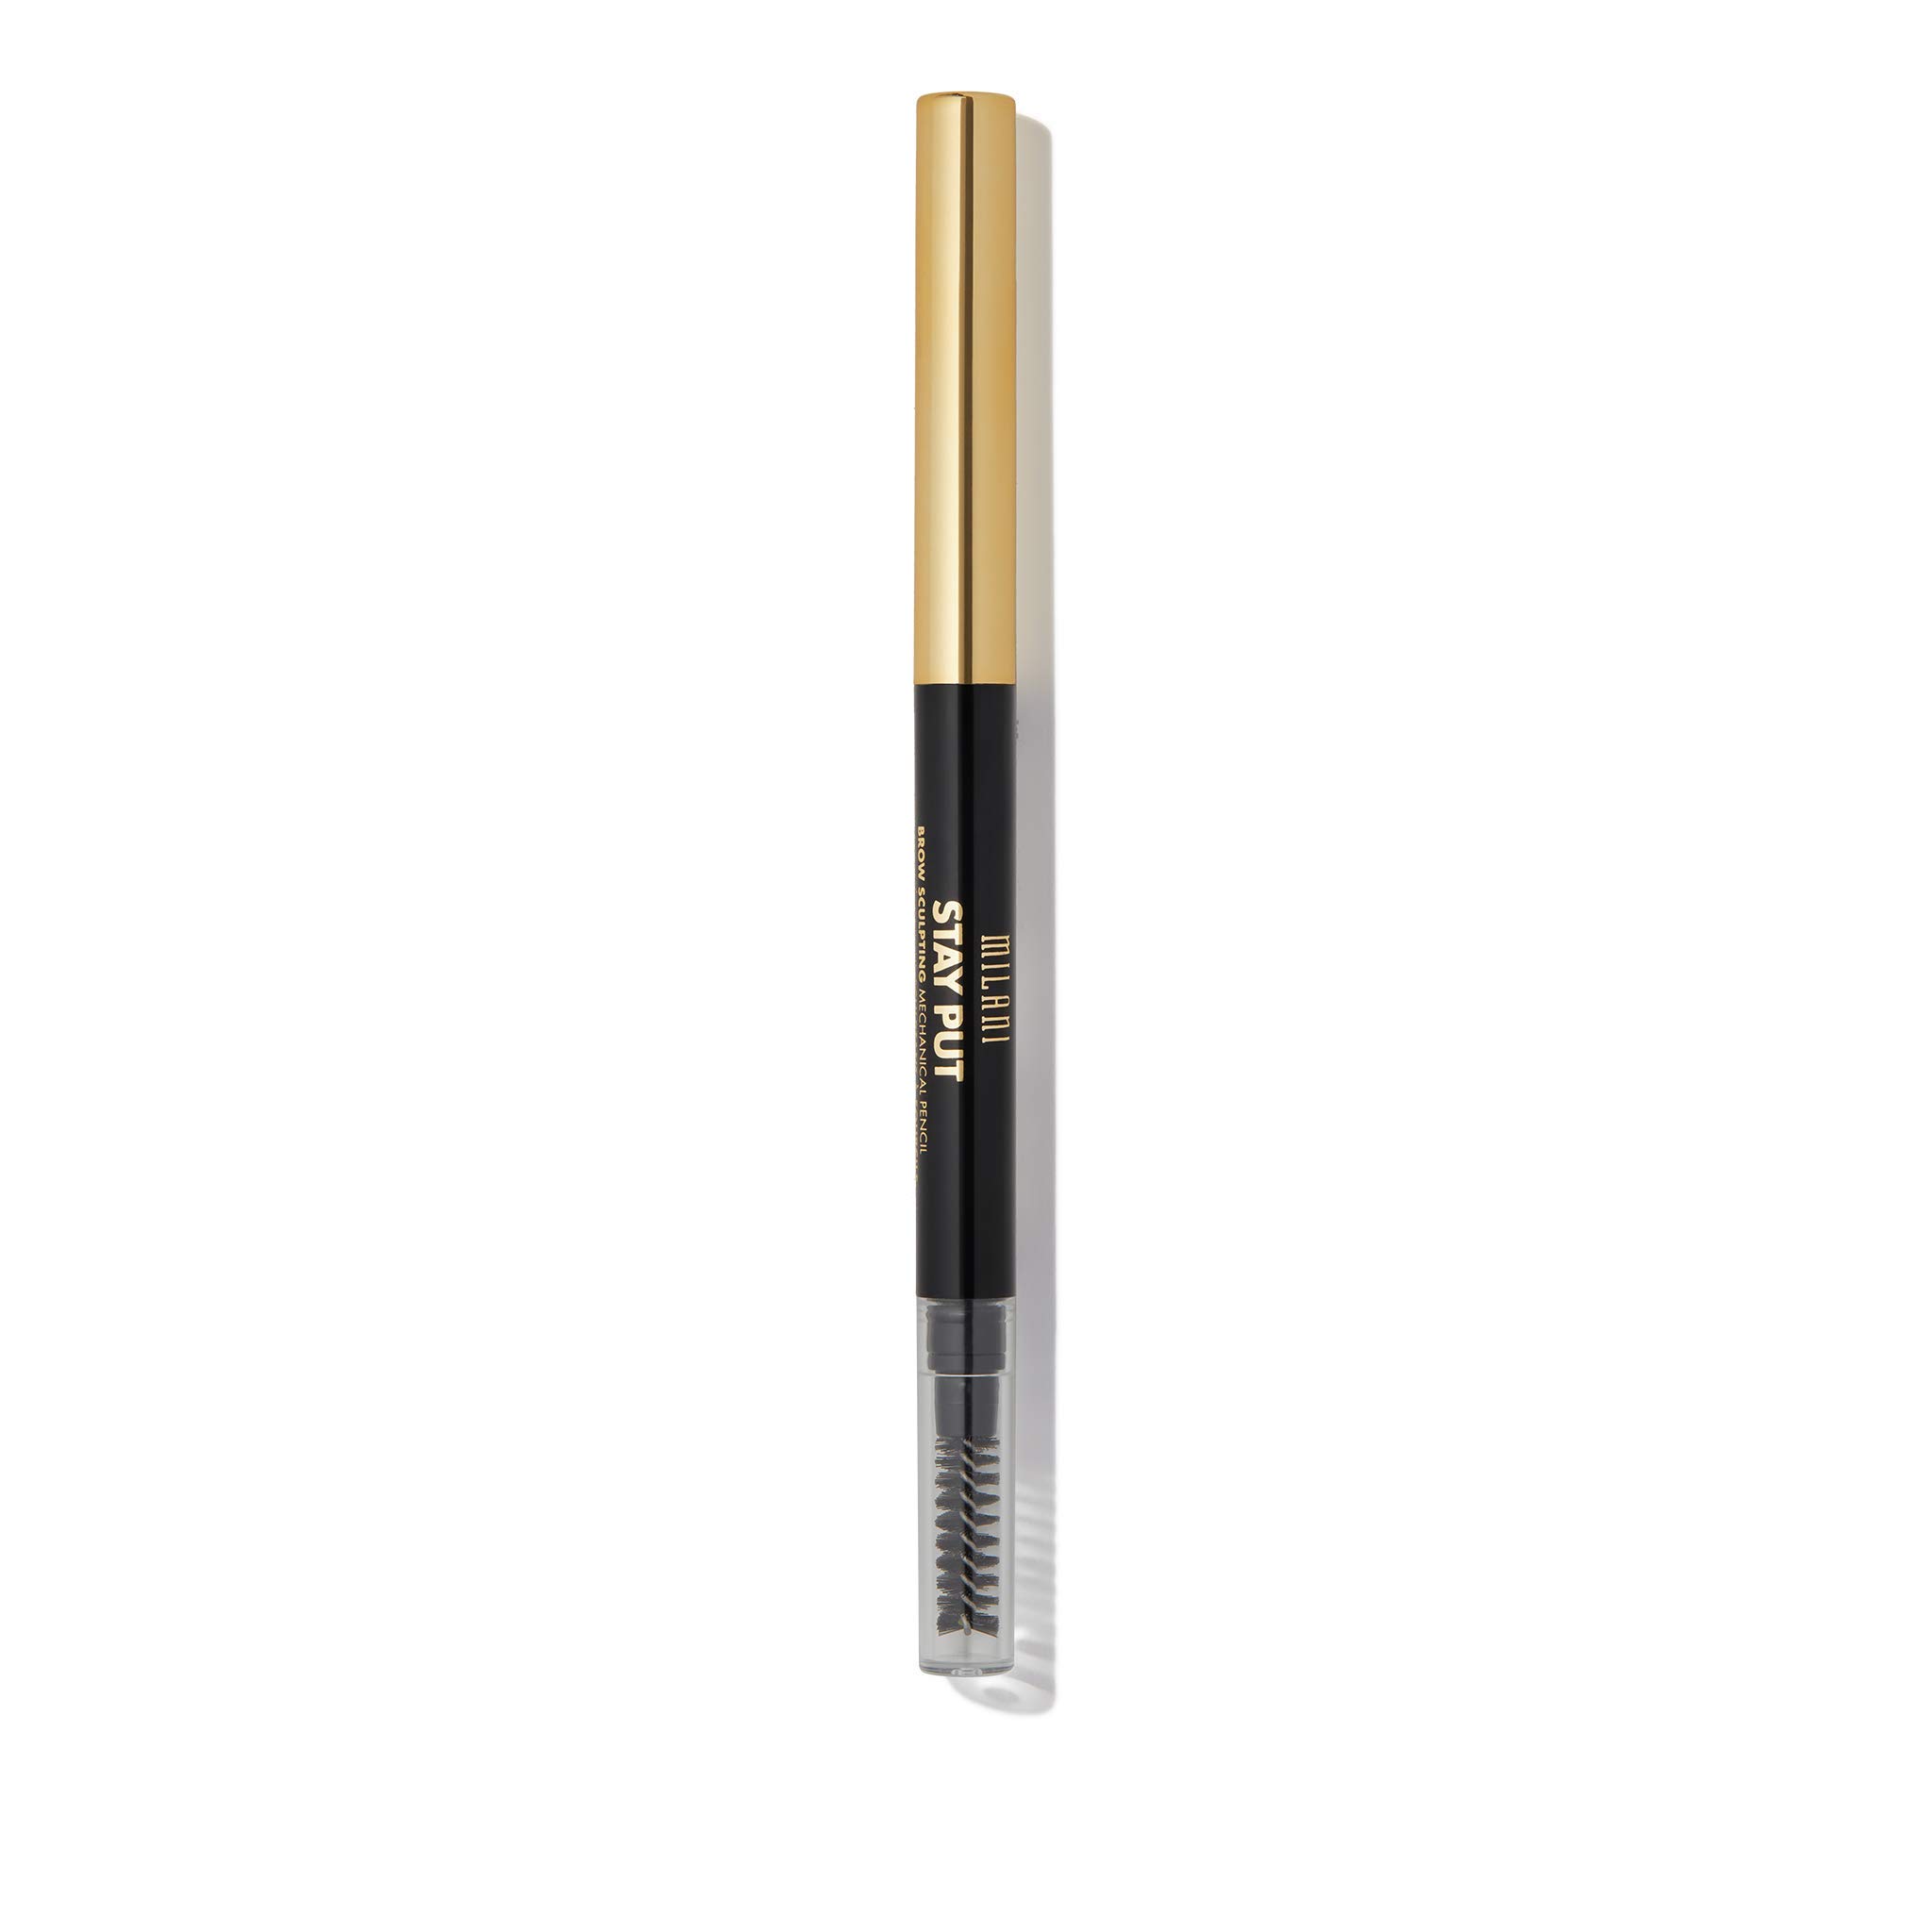 Milani Stay Put Brow Sculpting Mechanical Pencil - Medium Brown (0.01 Ounce) Cruelty-Free Long-Lasting Eyebrow Pencil that Defines and Shapes Brows